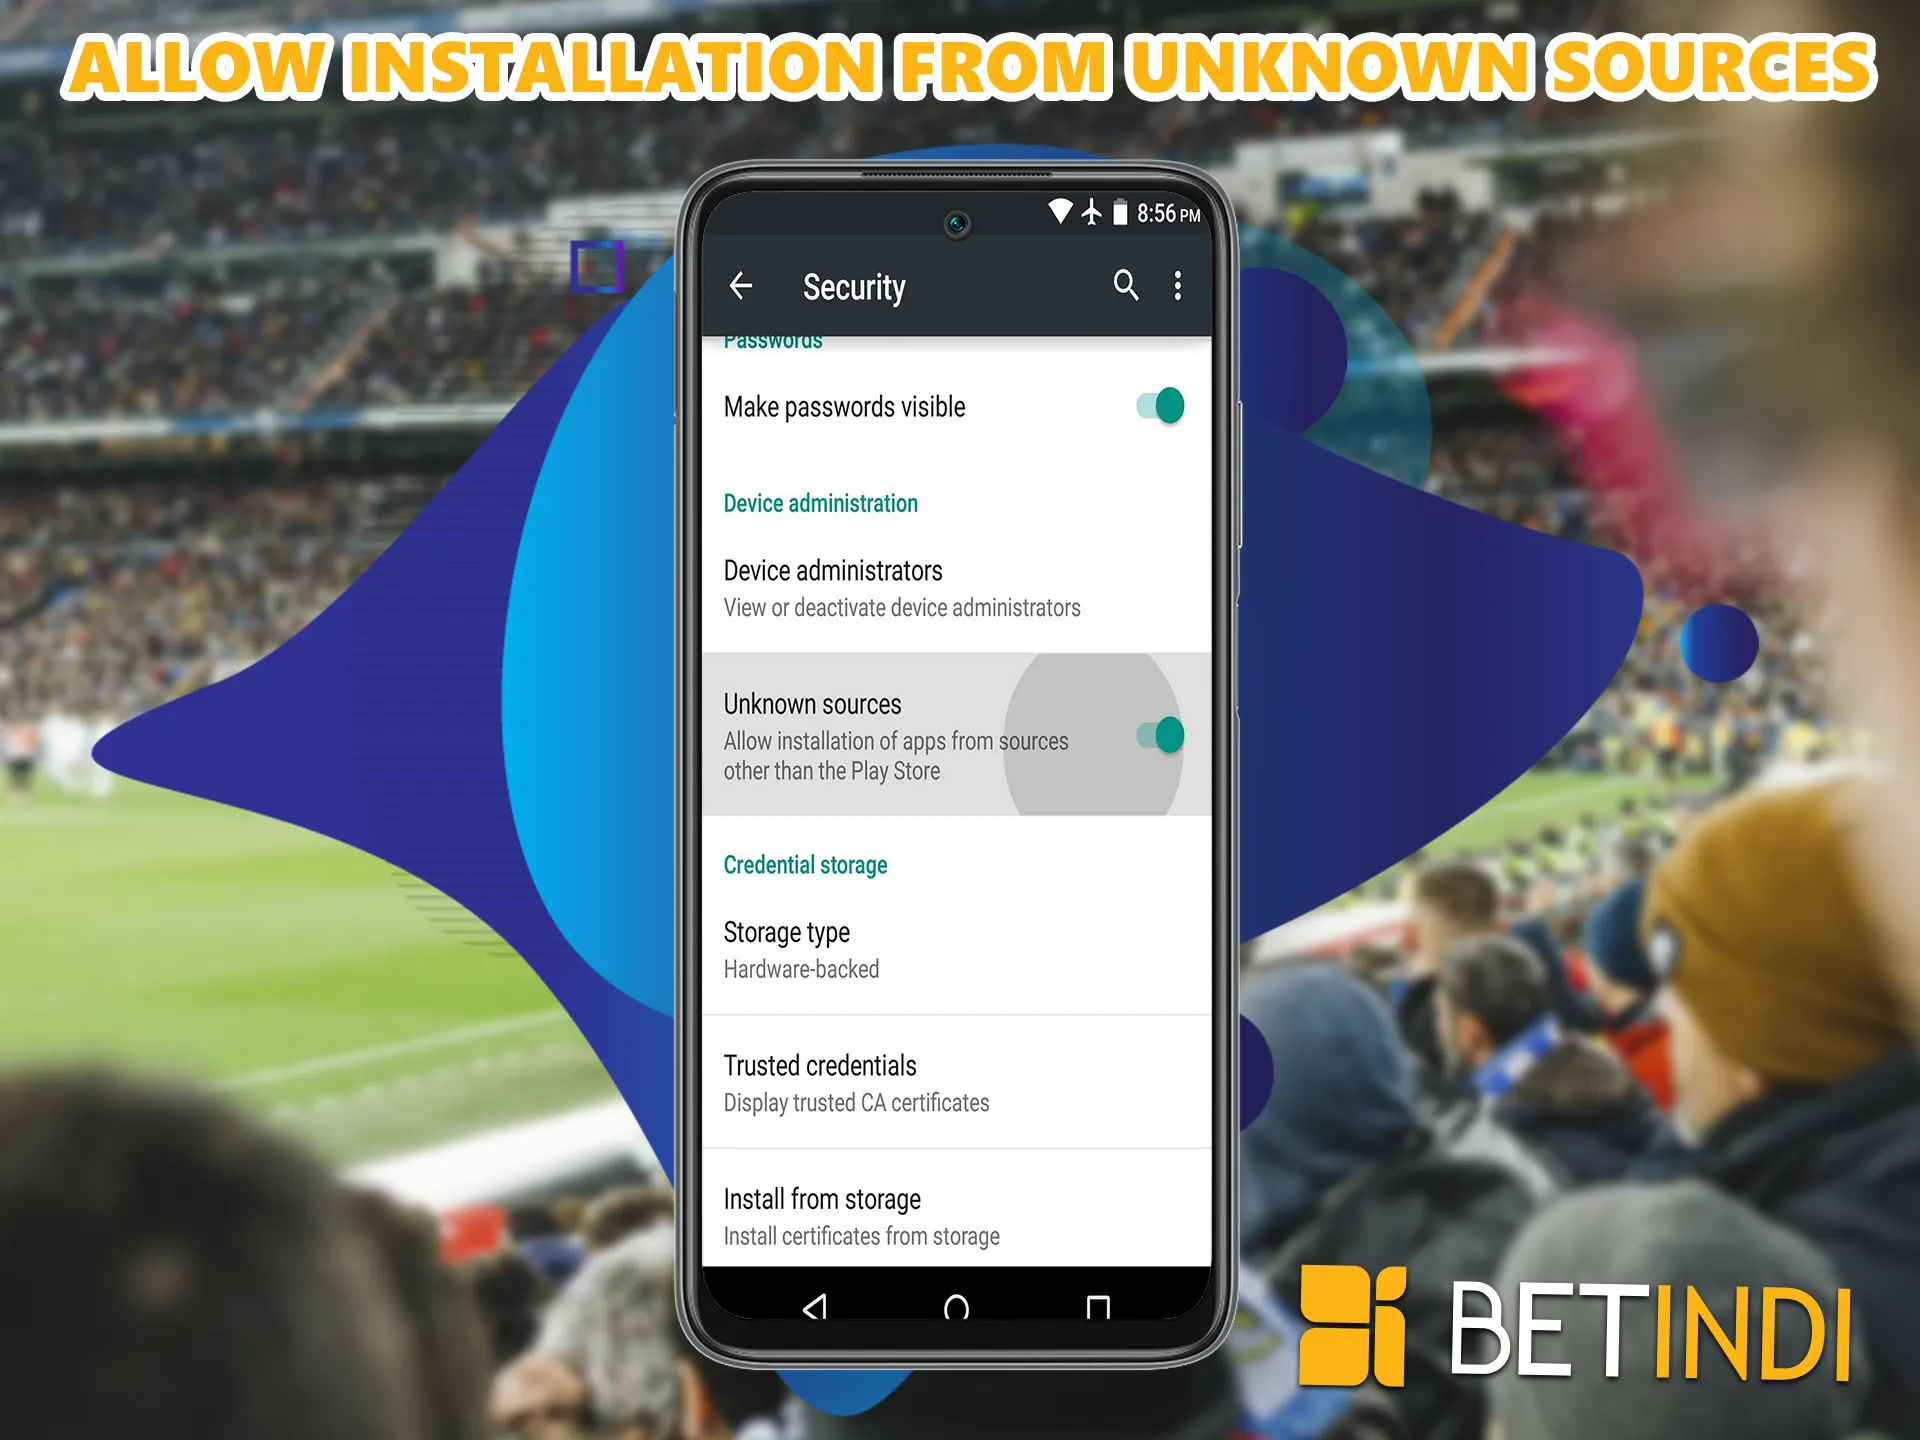 For BetIndi betting app to be successfully installed on your device, just go to settings and enable this item.